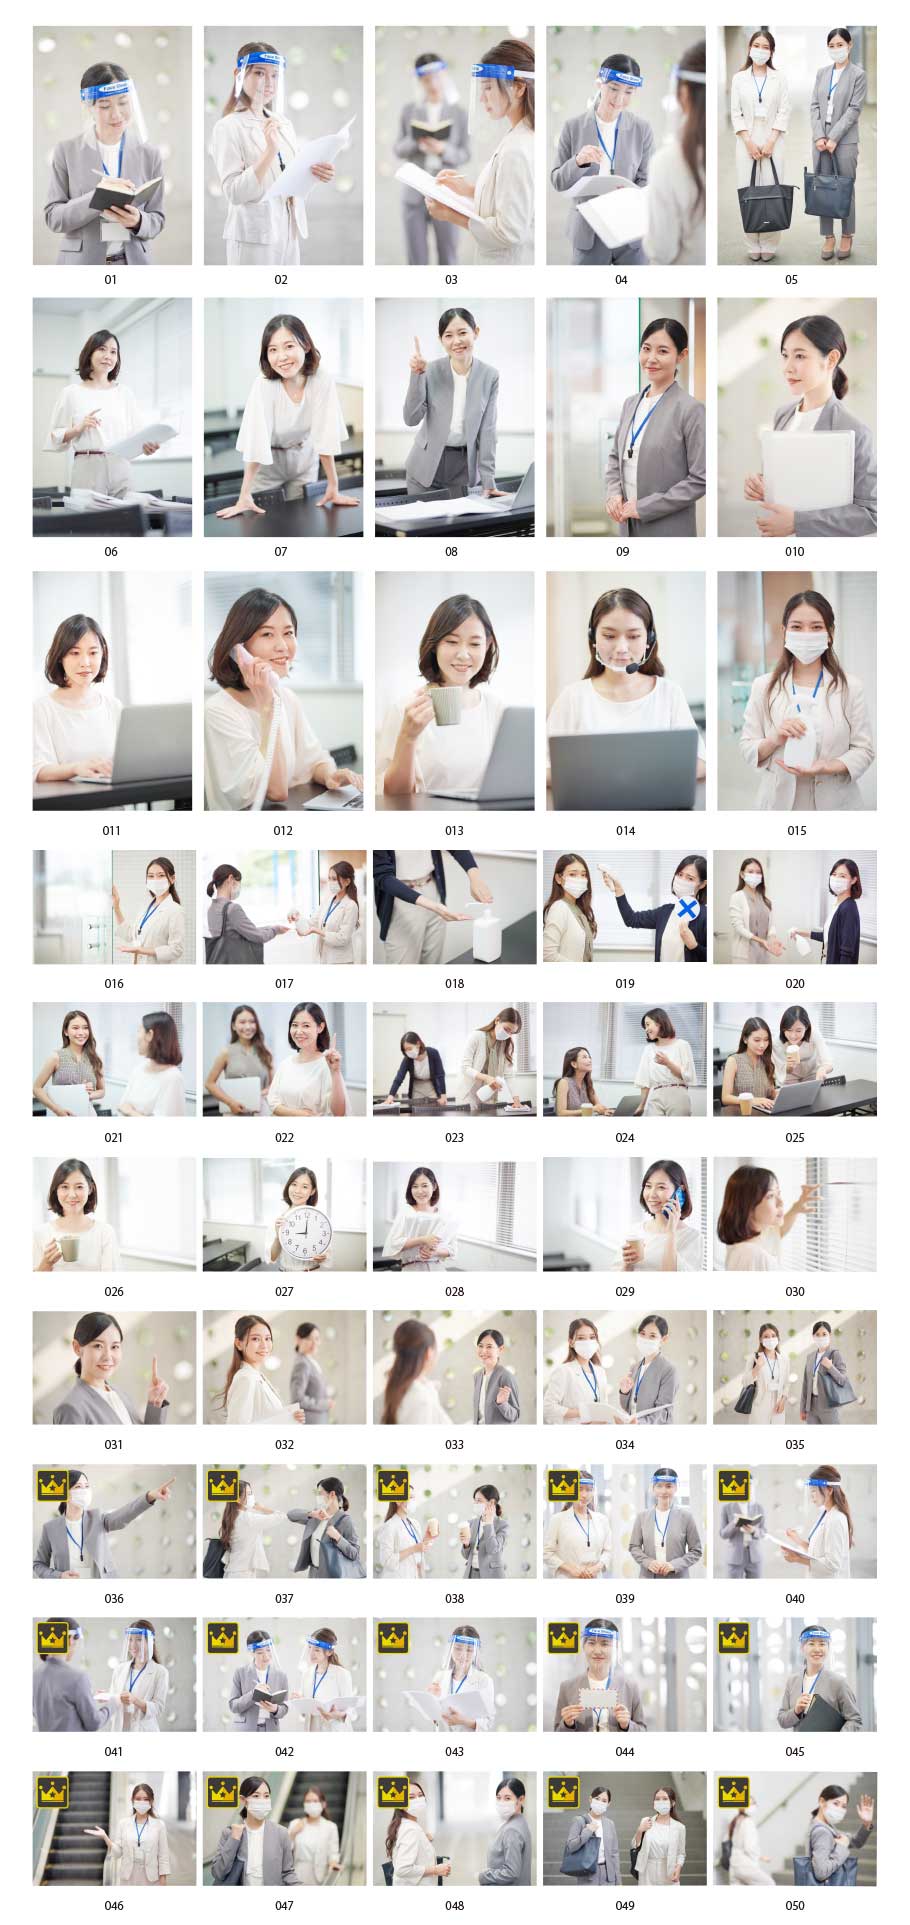 Women's business images